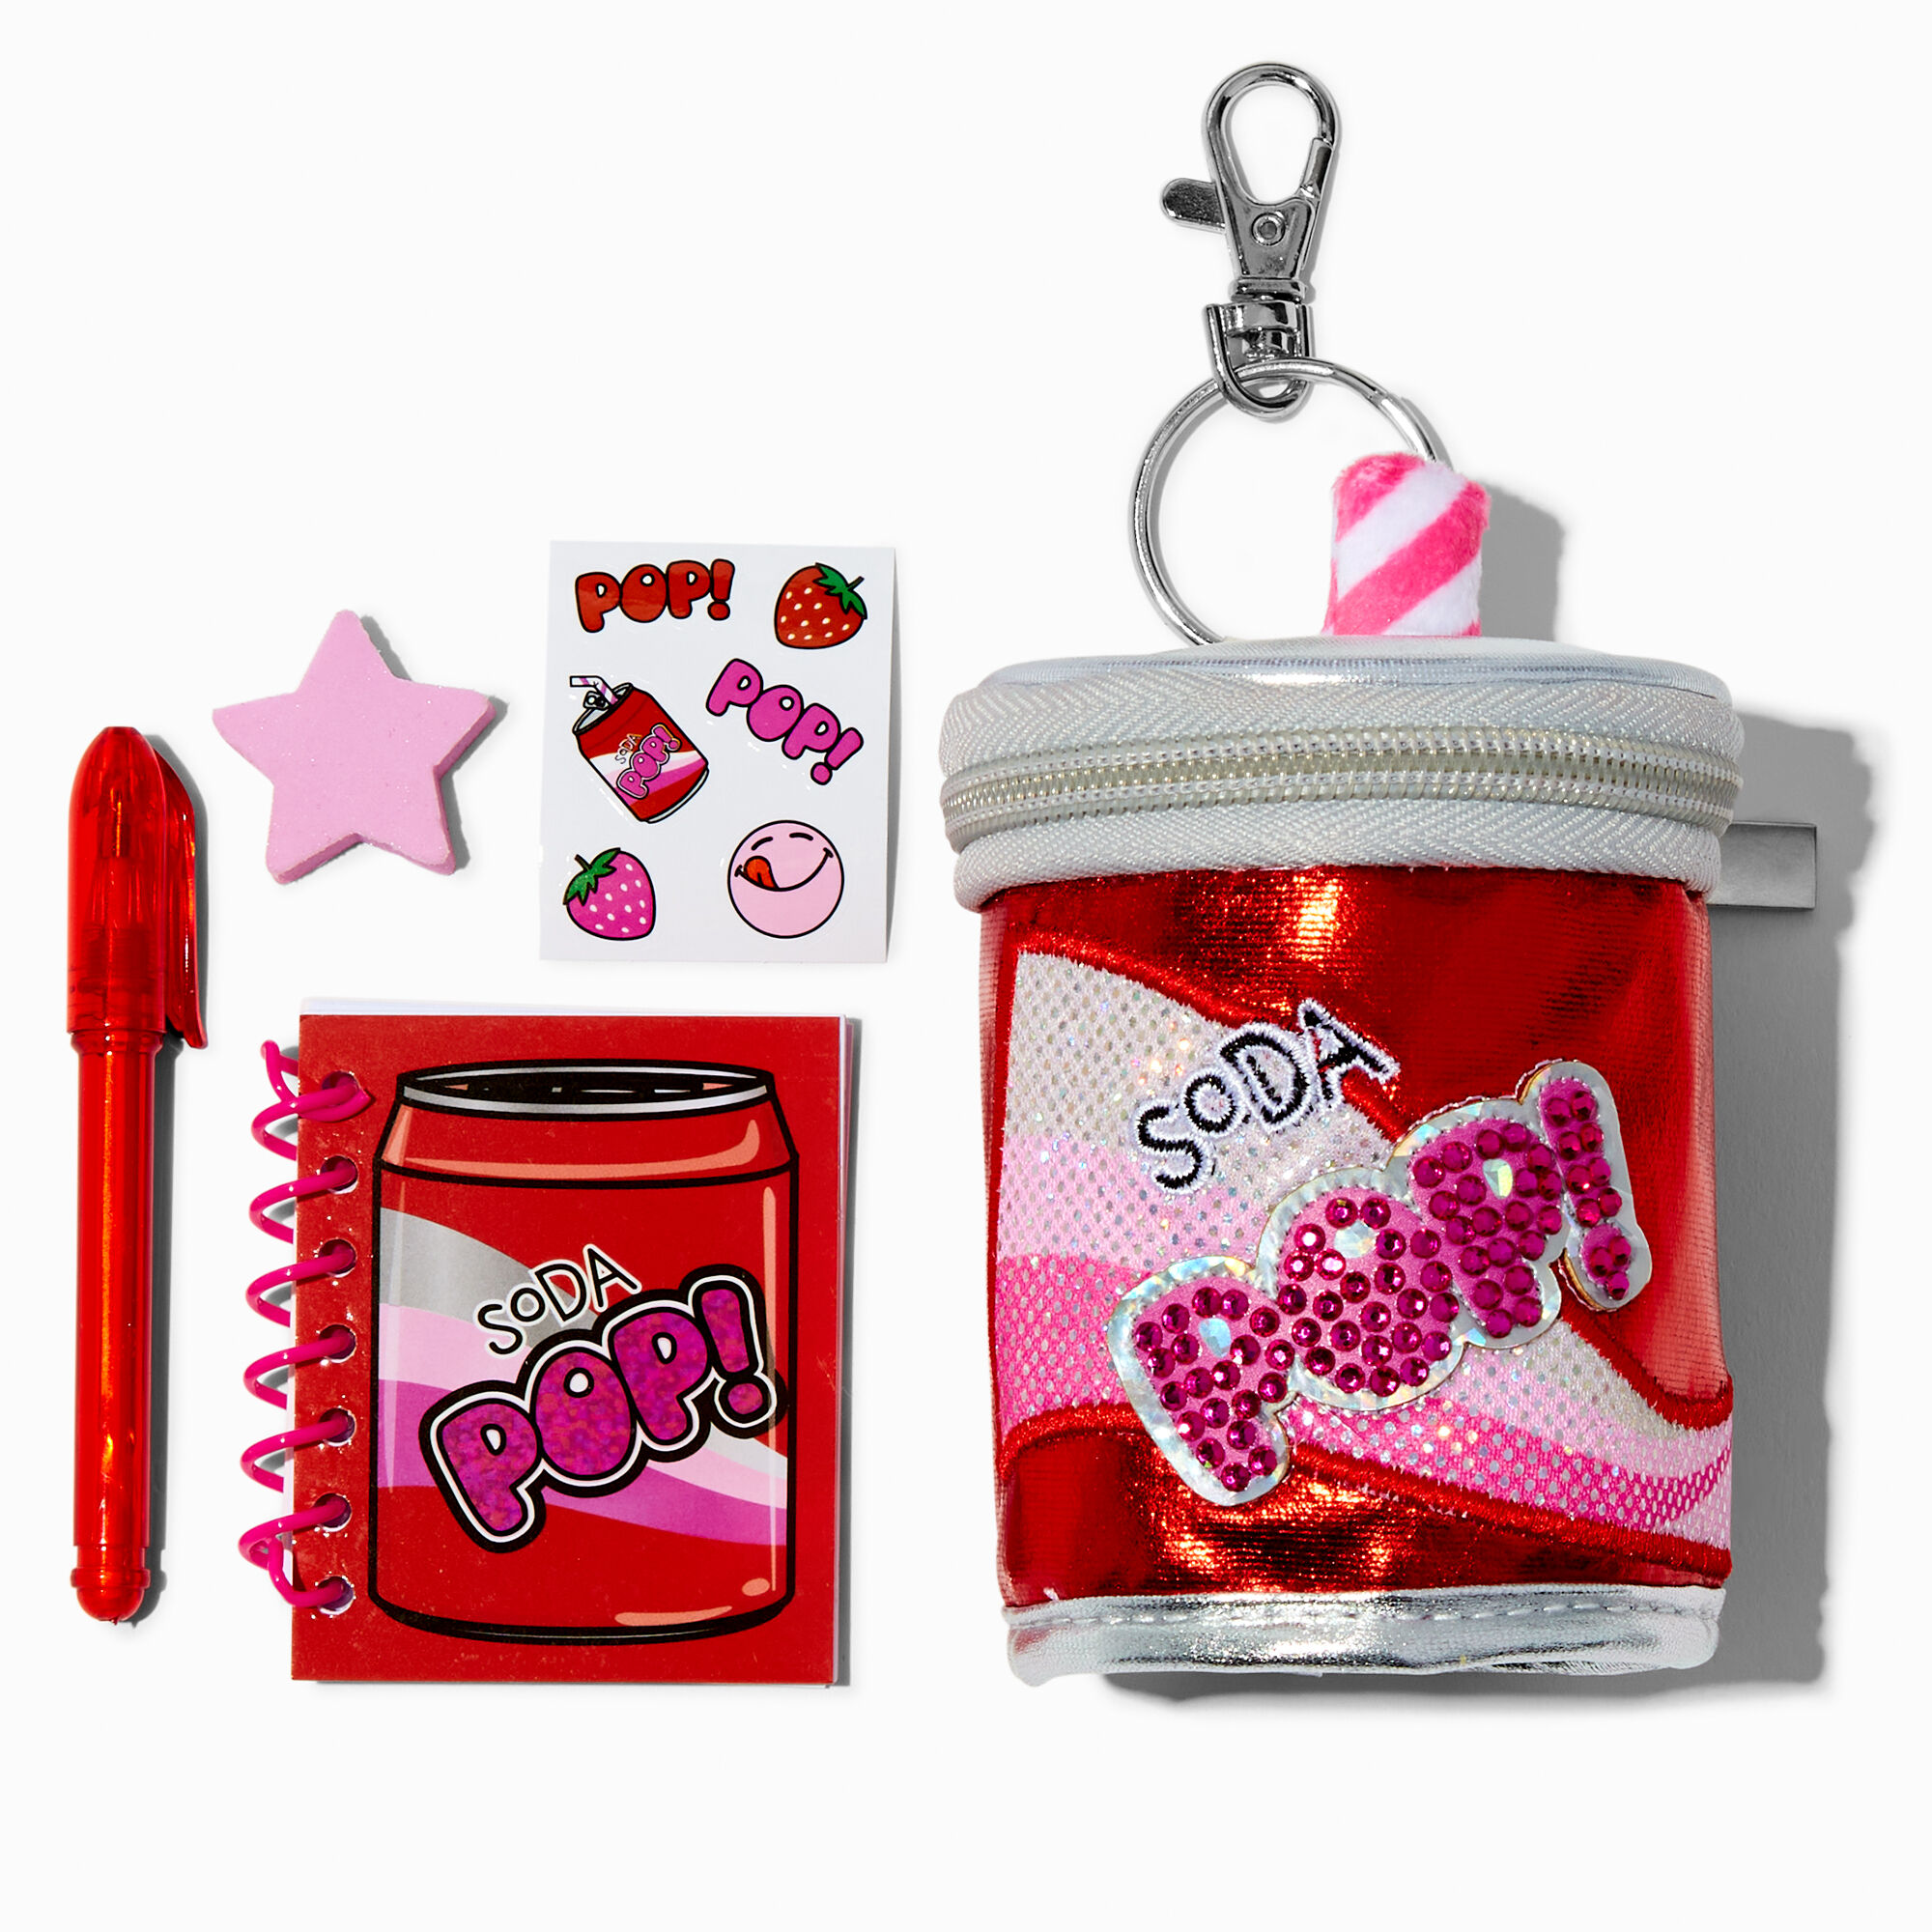 View Claires Pop 4 Stationery Set Red information